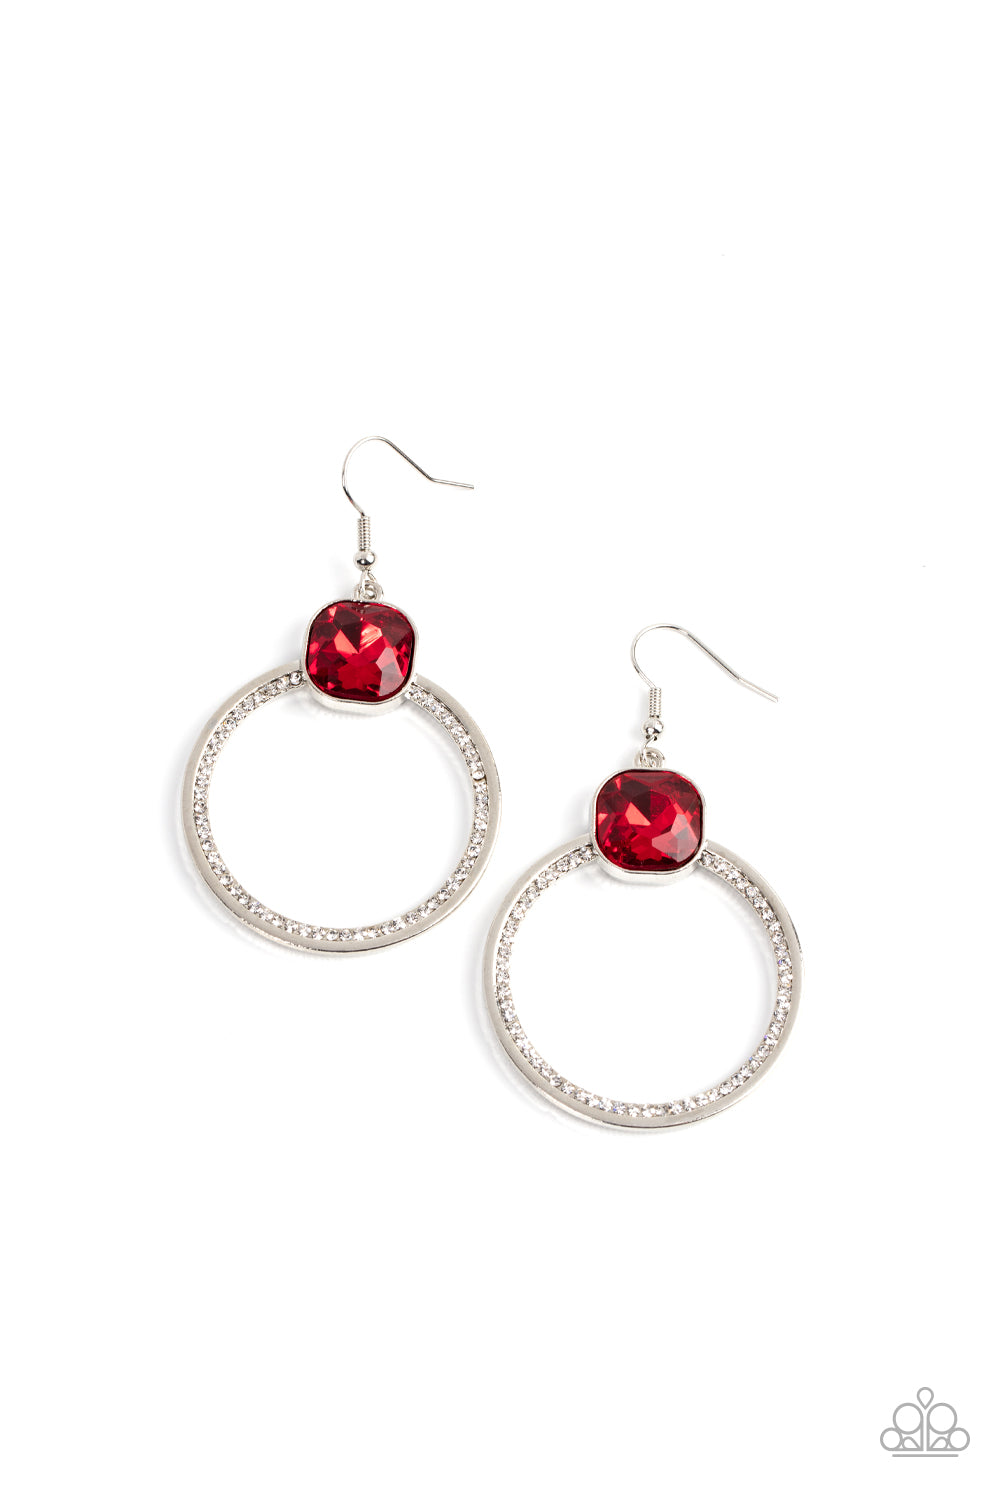 An oversized red gem sits atop a silver hoop with an inner ring encrusted in glitzy white rhinestones, resulting in a timeless twinkle. Earring attaches to a standard fishhook fitting.